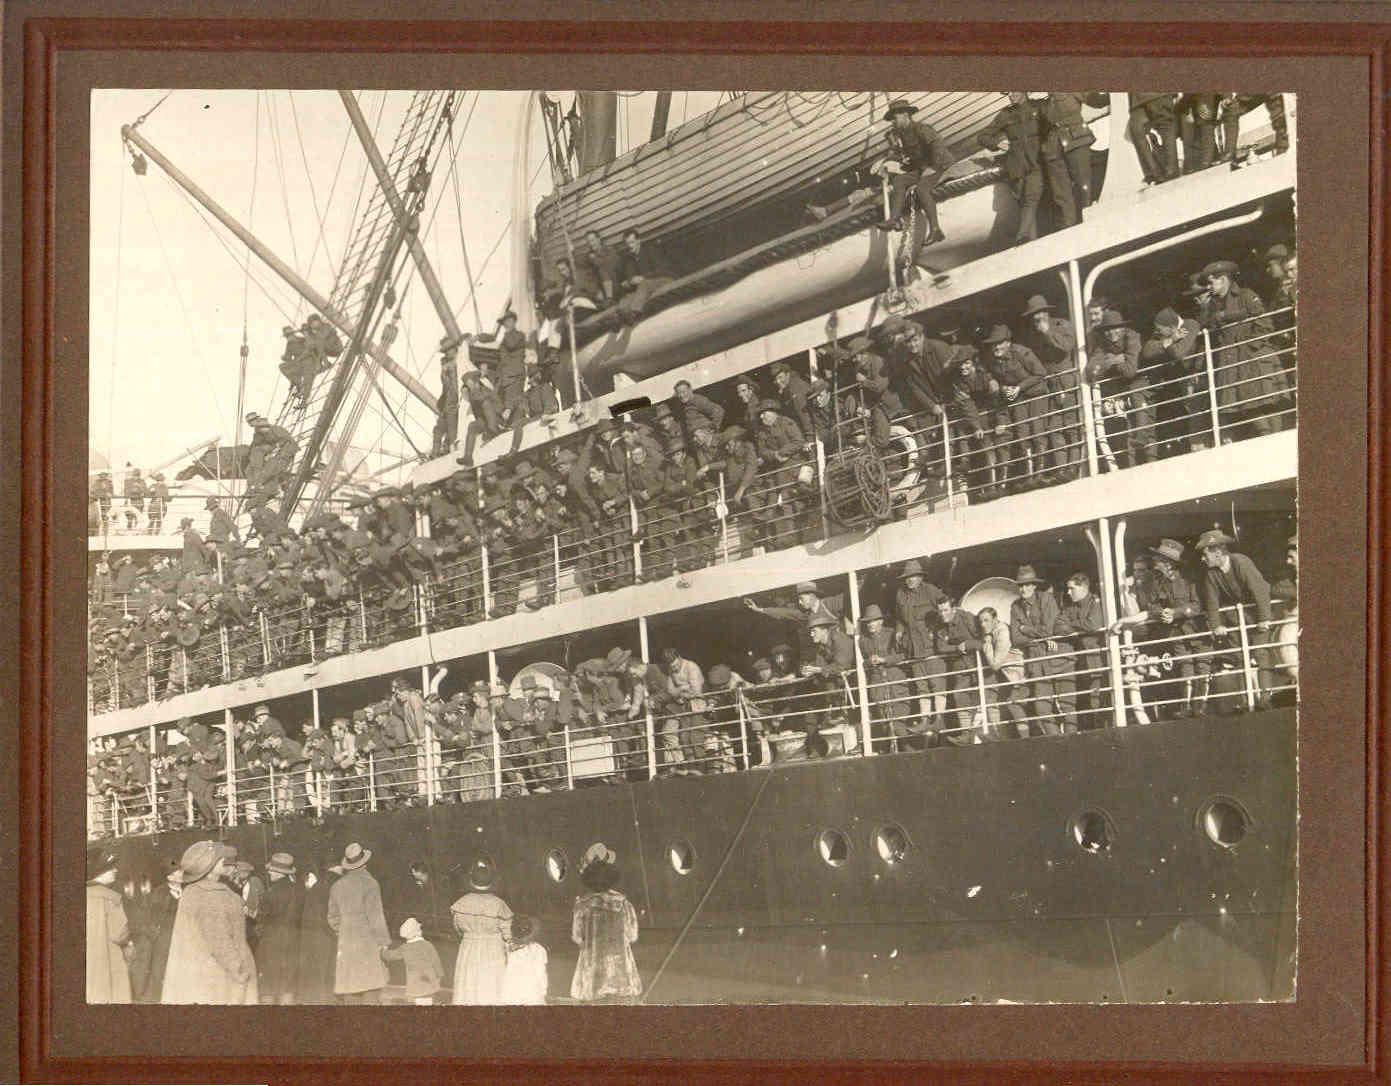 Maiden voyage, 1919, with return troops.